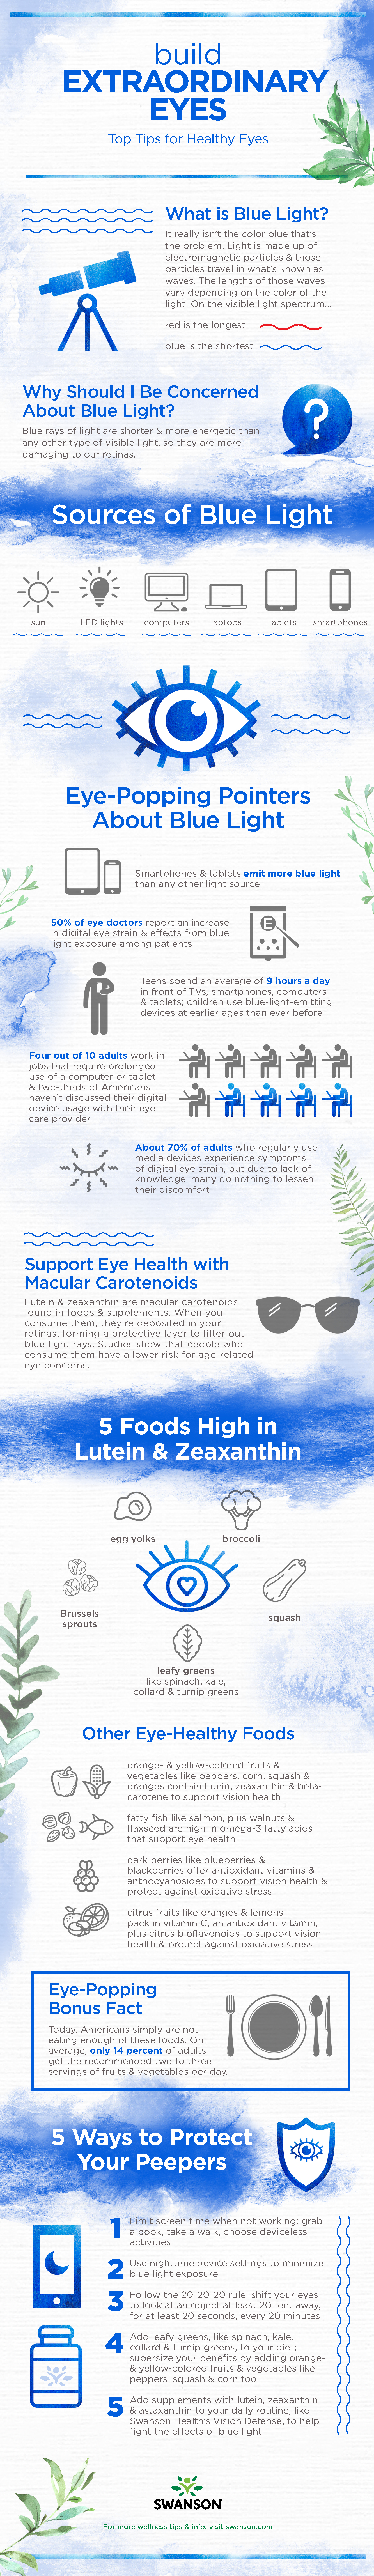 Build Extraordinary Eyes with Nutrition for Eye Health - infographic with blue light facts and eye health tips